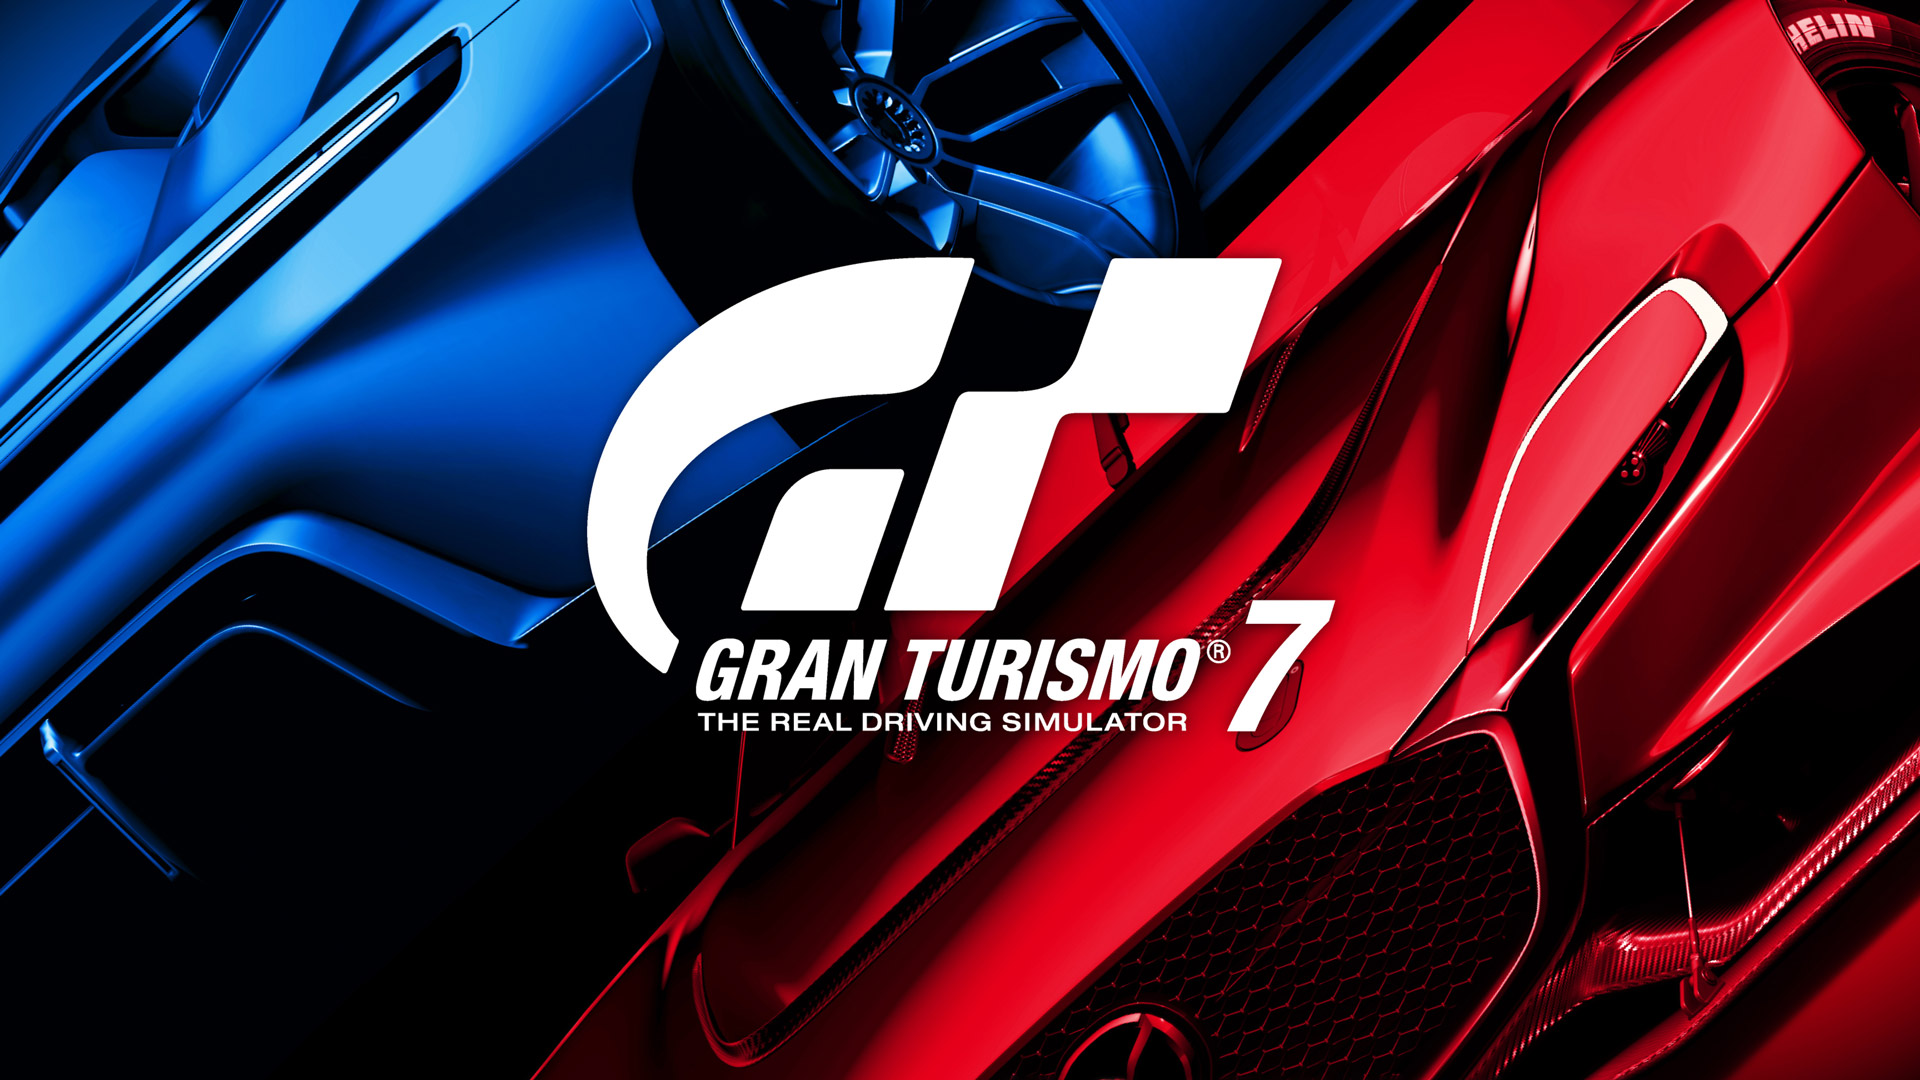 PS5 Players Can Now Play Gran Turismo 7 In VR - GameSpot